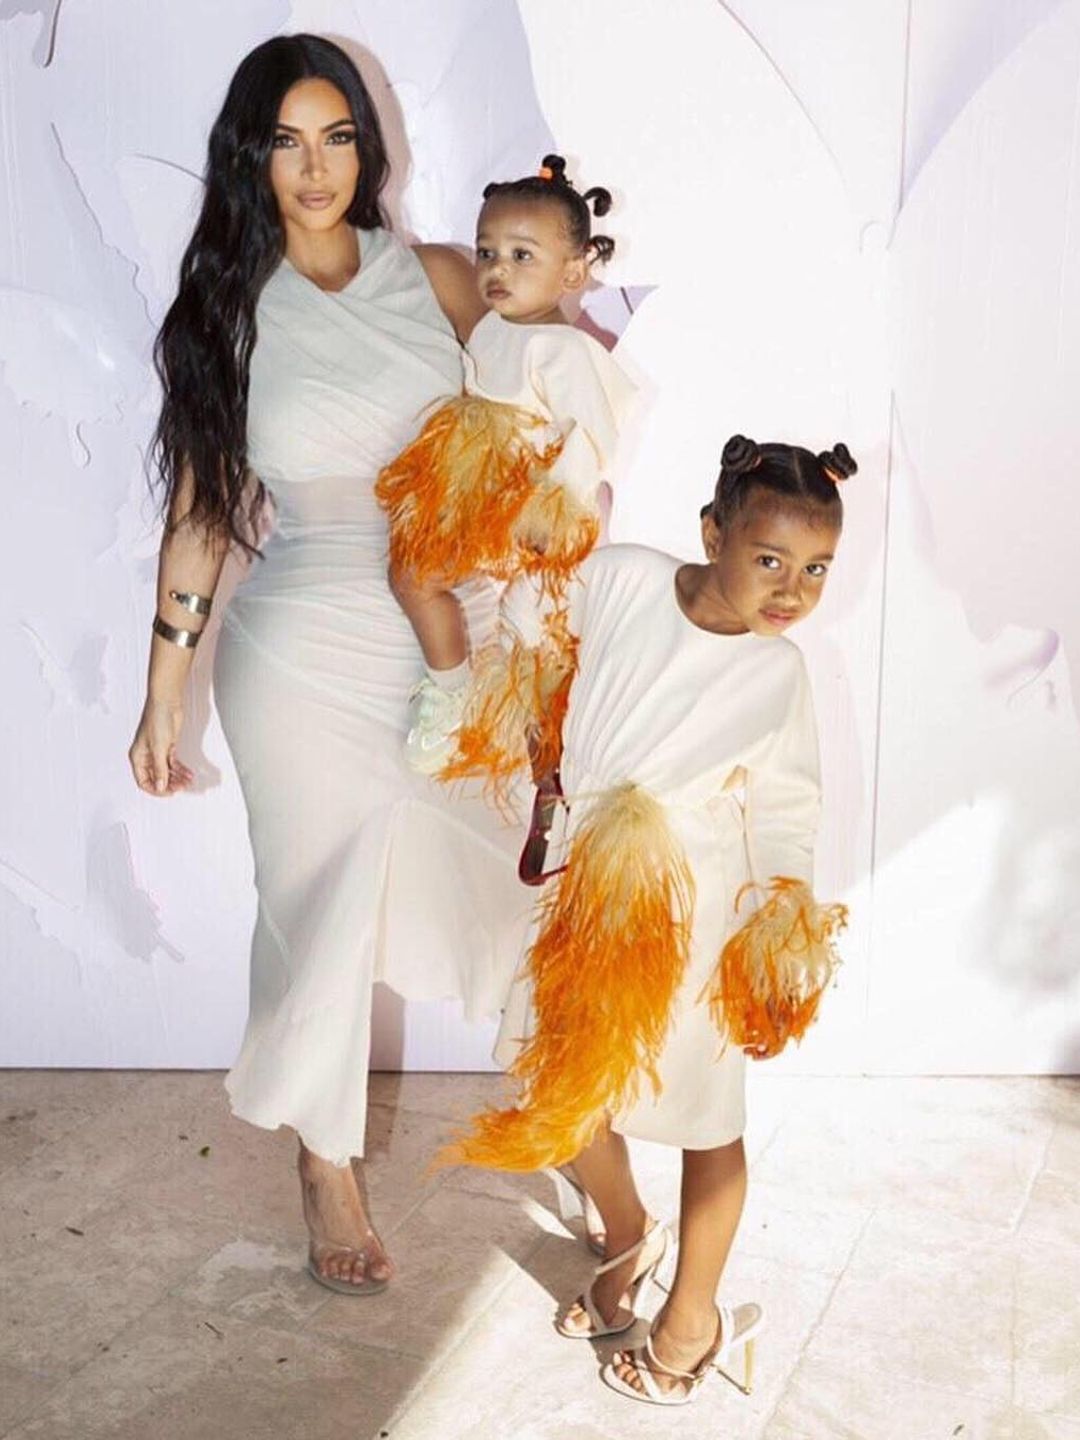 Chicago twinning in a white dress with orange tassels with her mom and sister